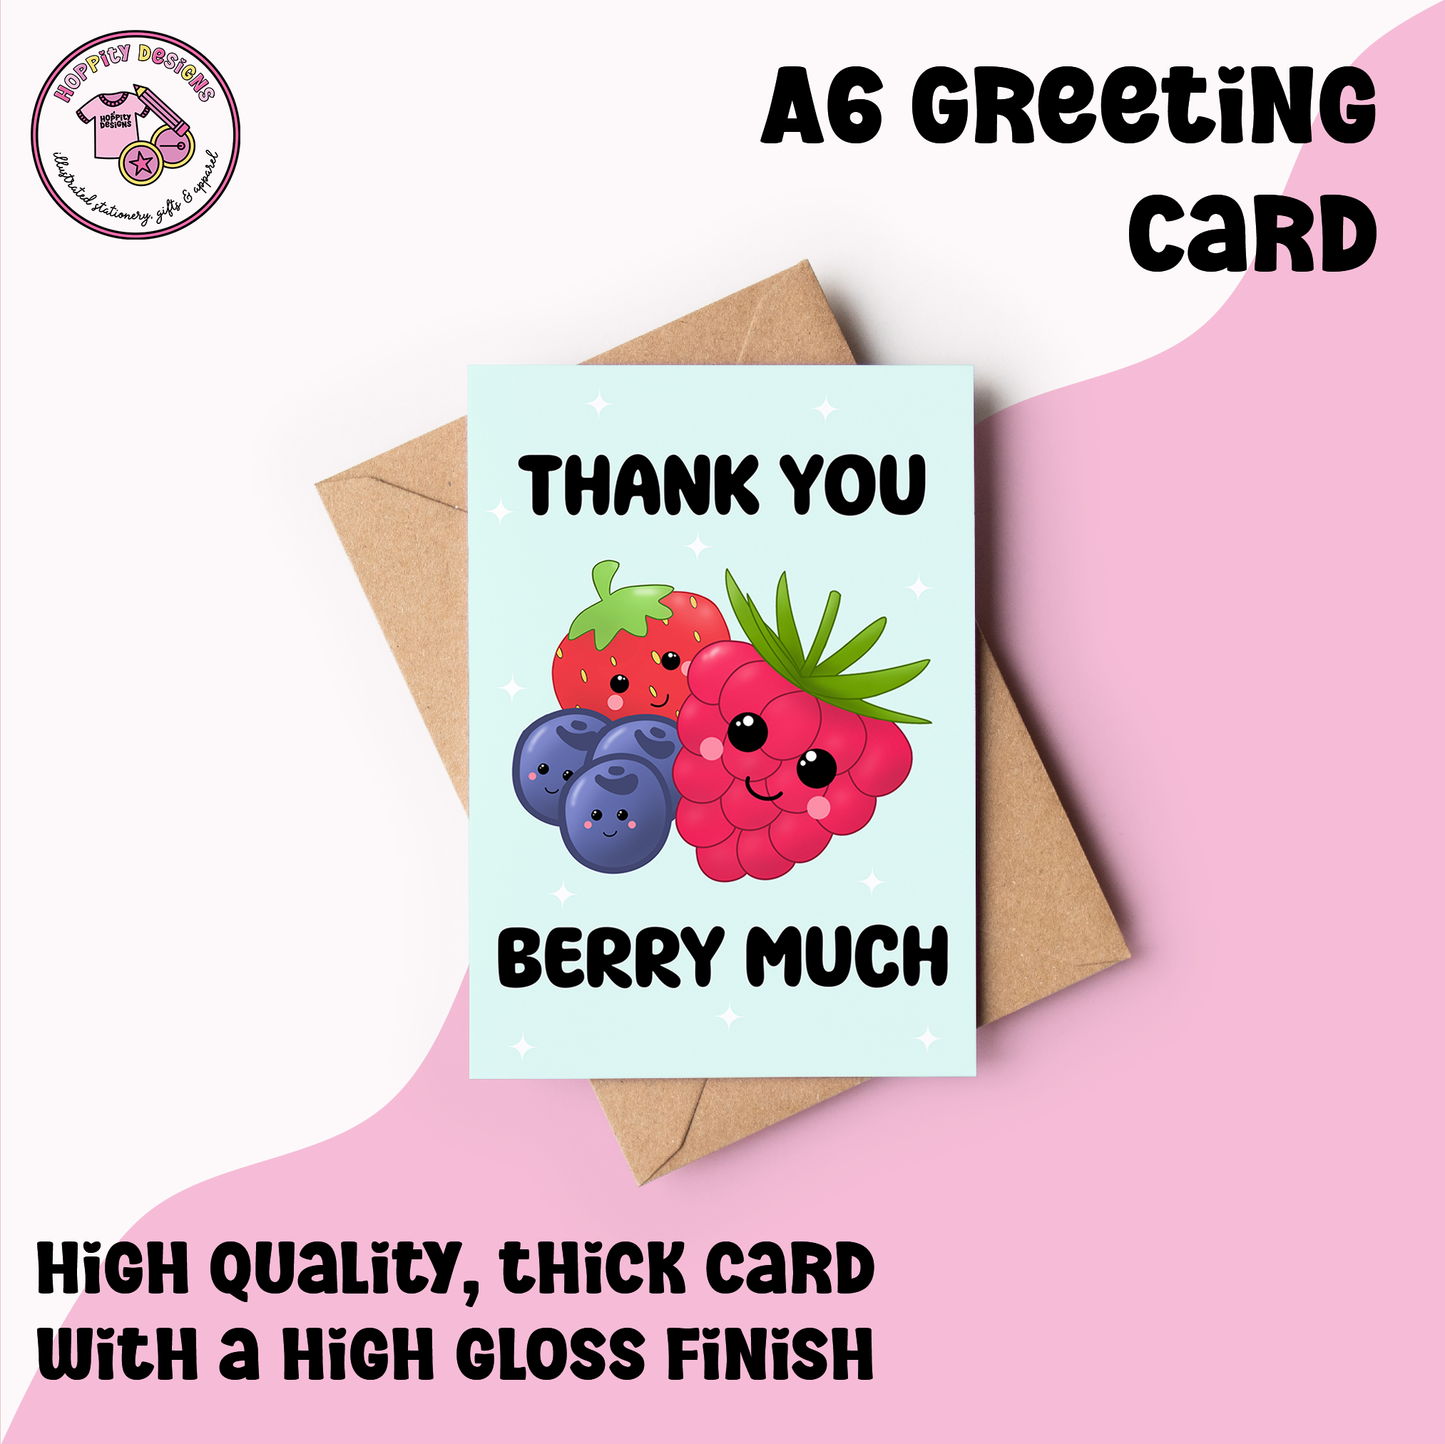 Thank you Berry Much Card